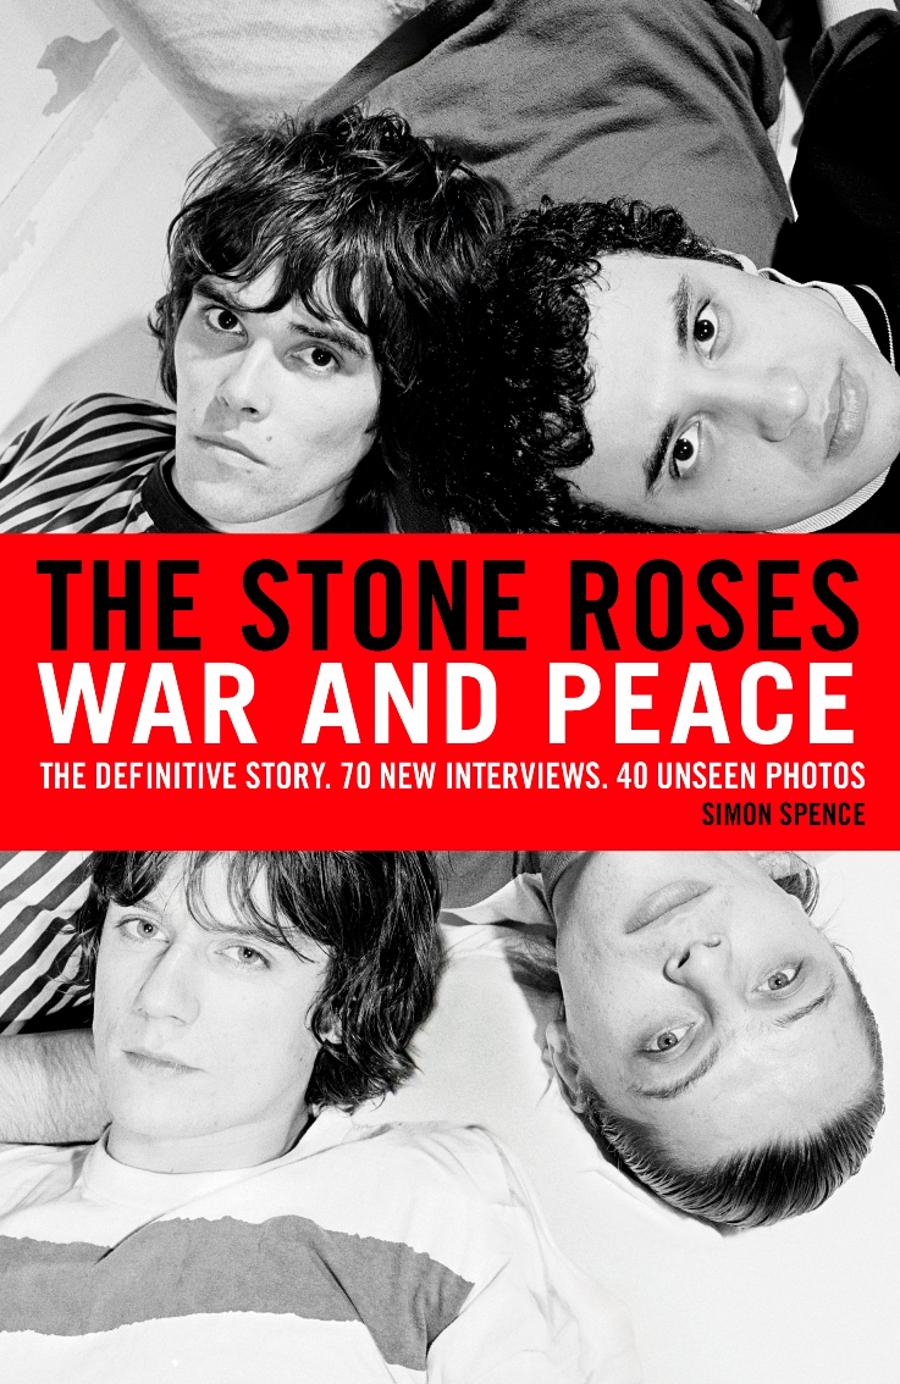 Book Review: The Stone Roses War And Peace, By Simon Spence